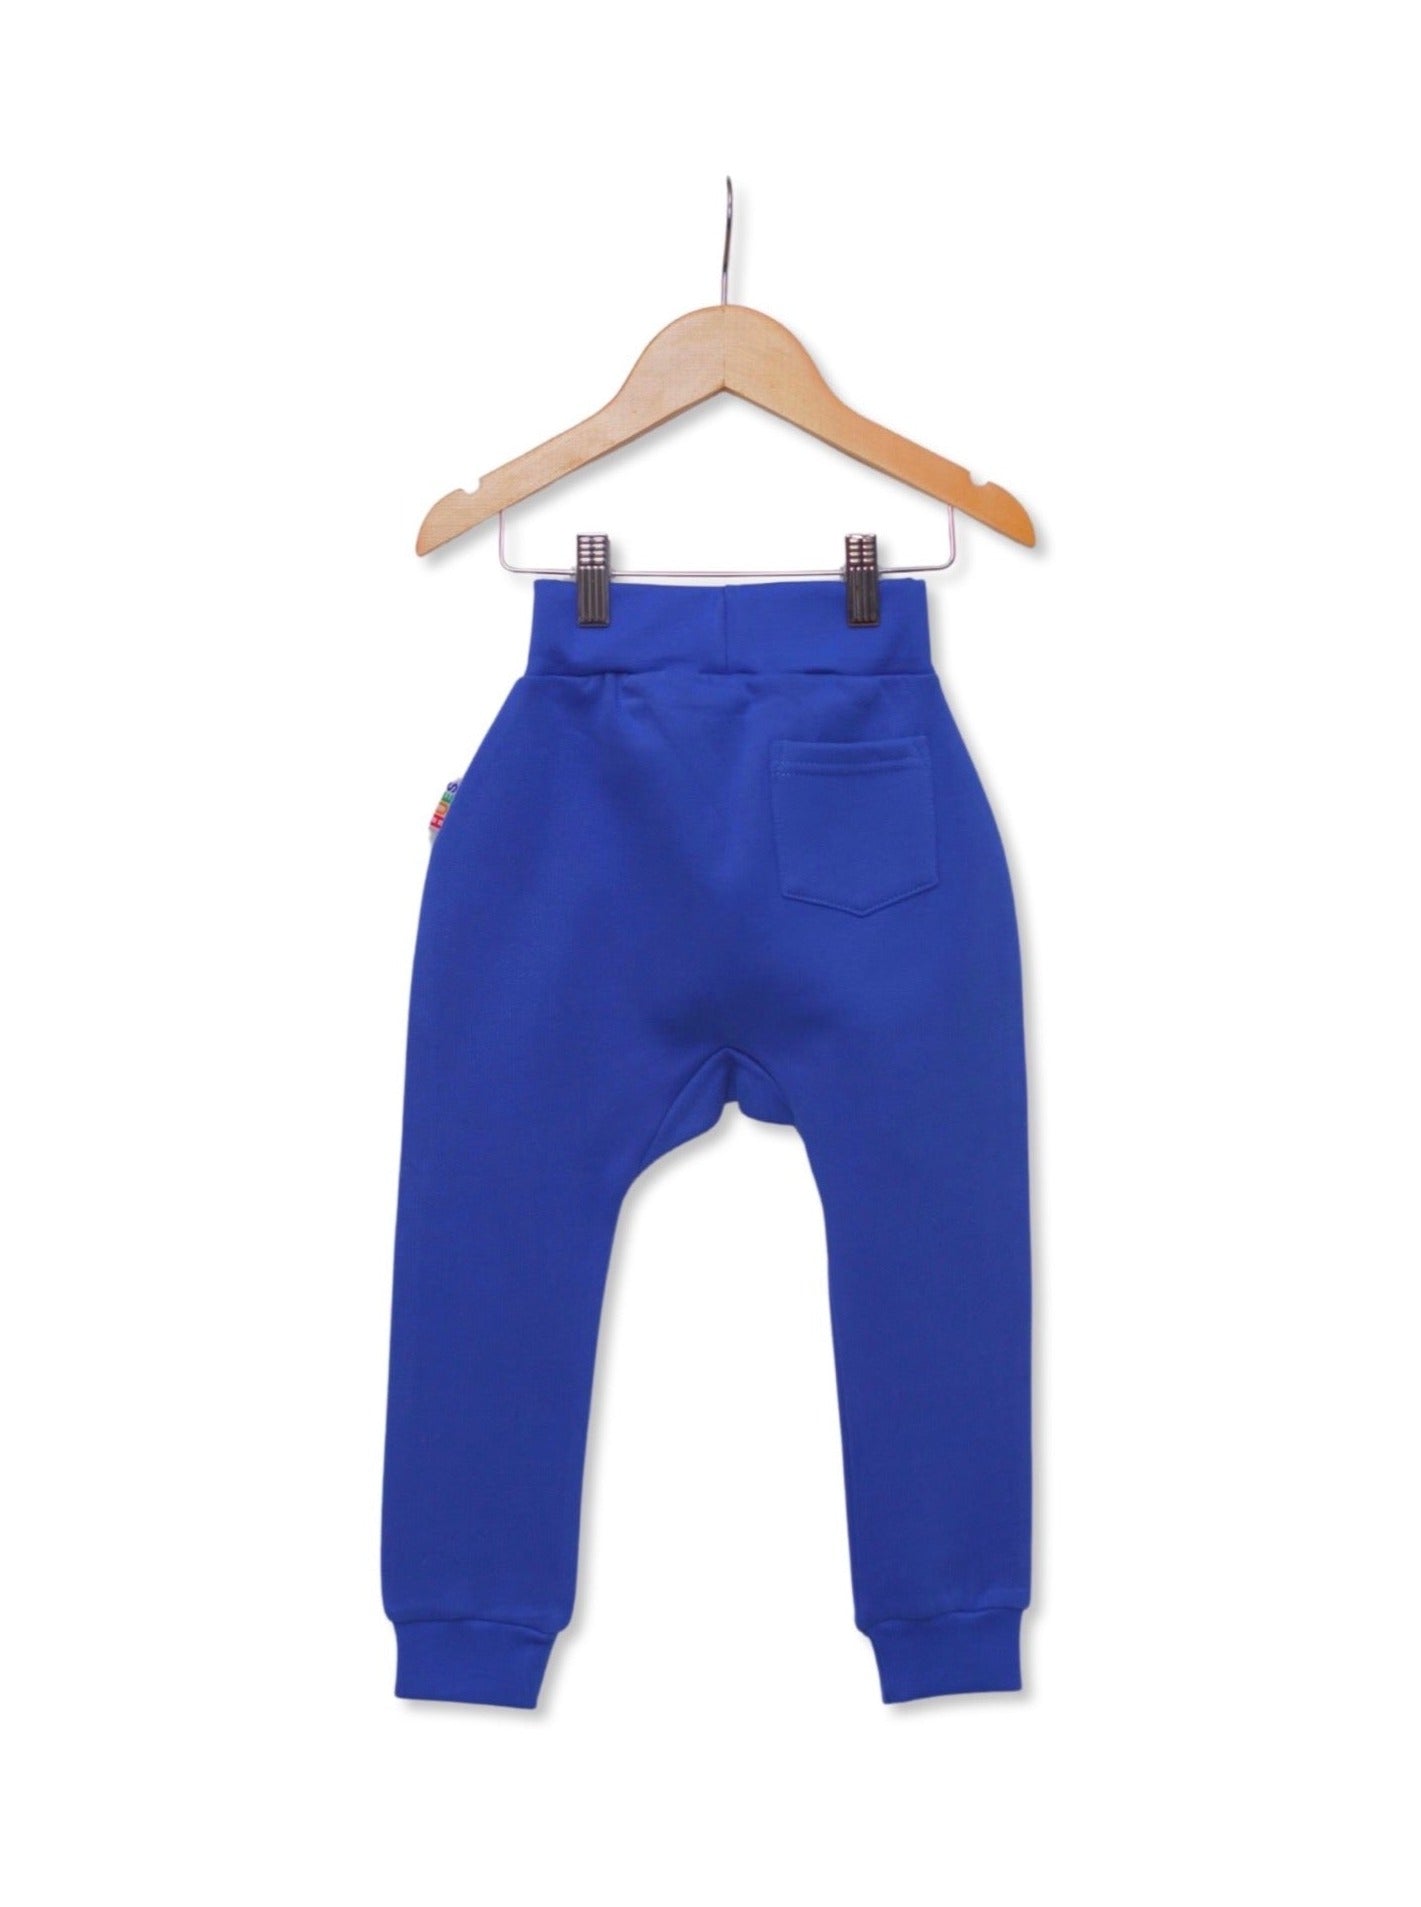 Blue Unisex Kids Joggers Back View - Hues Clothing